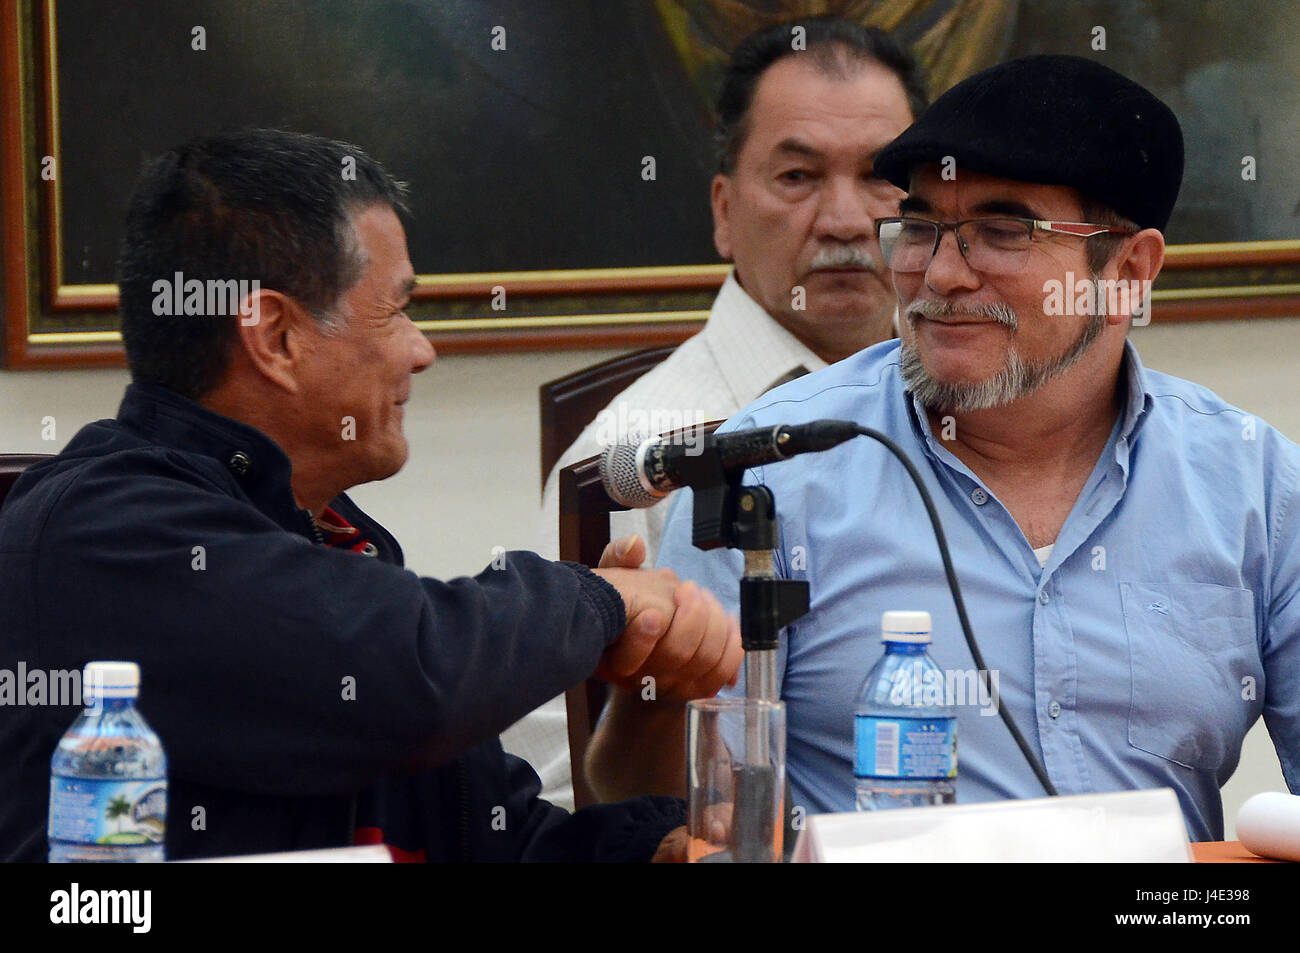 Havana, Cuba. 11th May, 2017. Rodrigo Londono (R), who is also known as Timoleon Jimenez, leader of the Revolutionary Armed Forces of Colombia (FARC), and Nicolas Rodriguez (L), commander of the National Liberation Army (ELN), attend a joint press conference in Havana, Cuba, on May 11, 2017. Colombia's top guerrilla groups on Thursday called for an end to political violence in the South American nation as well as the complete implementation of a peace process that will end over 50 years of armed conflict. Credit: Joaquin Hernandez/Xinhua/Alamy Live News Stock Photo